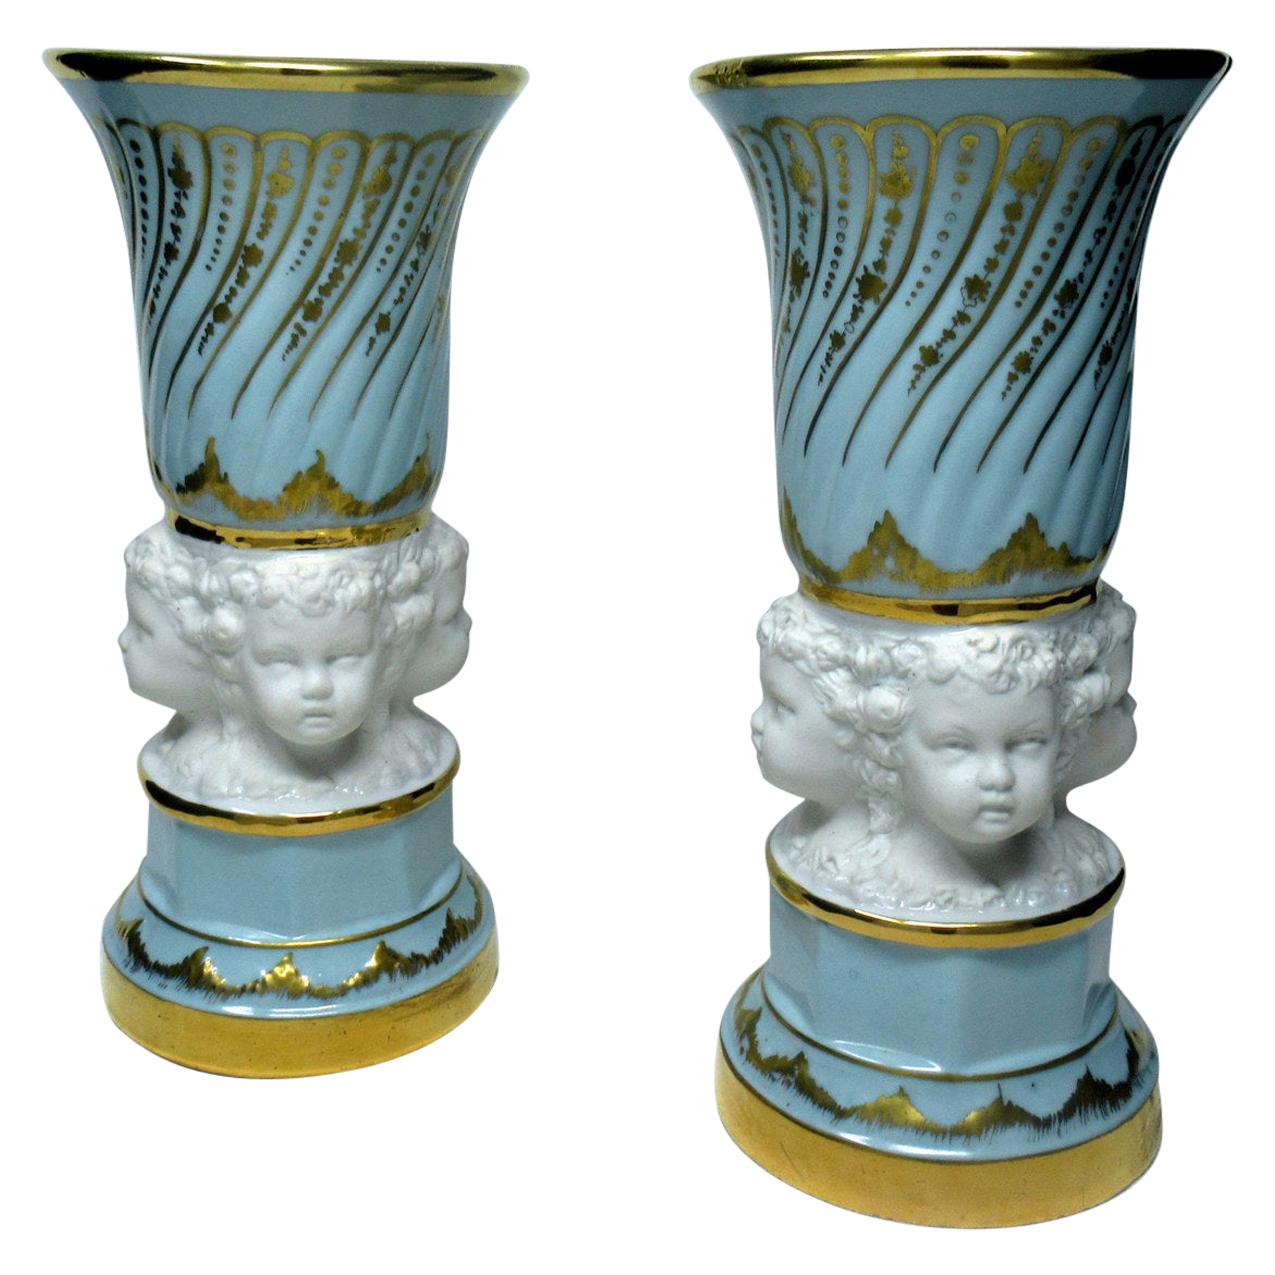 Pair of Midcentury Sèvres Style French Gilt Porcelain Bisque Parian Vases Urns